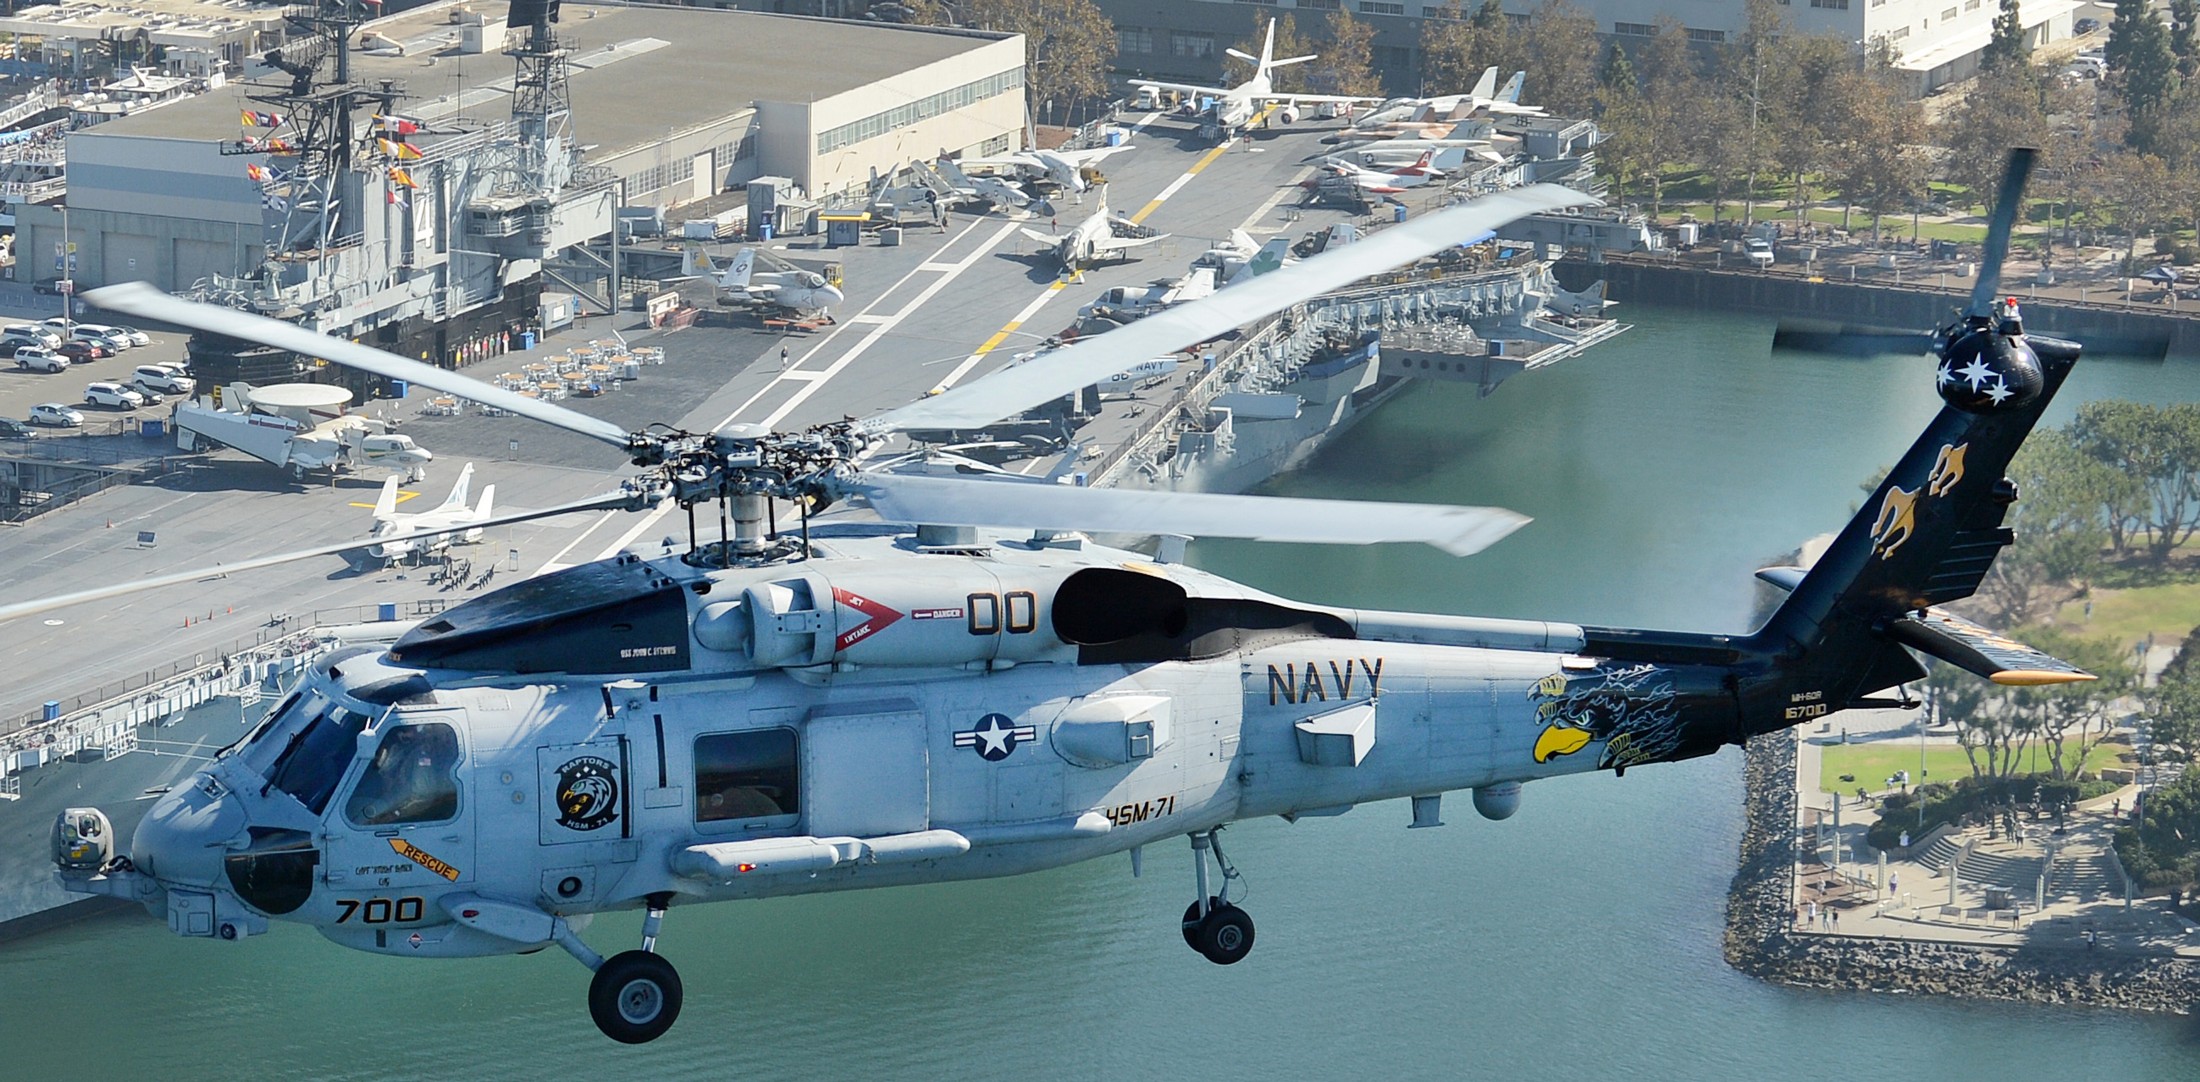 hsm-71 raptors helicopter maritime strike squadron mh-60r seahawk navy 2014 24